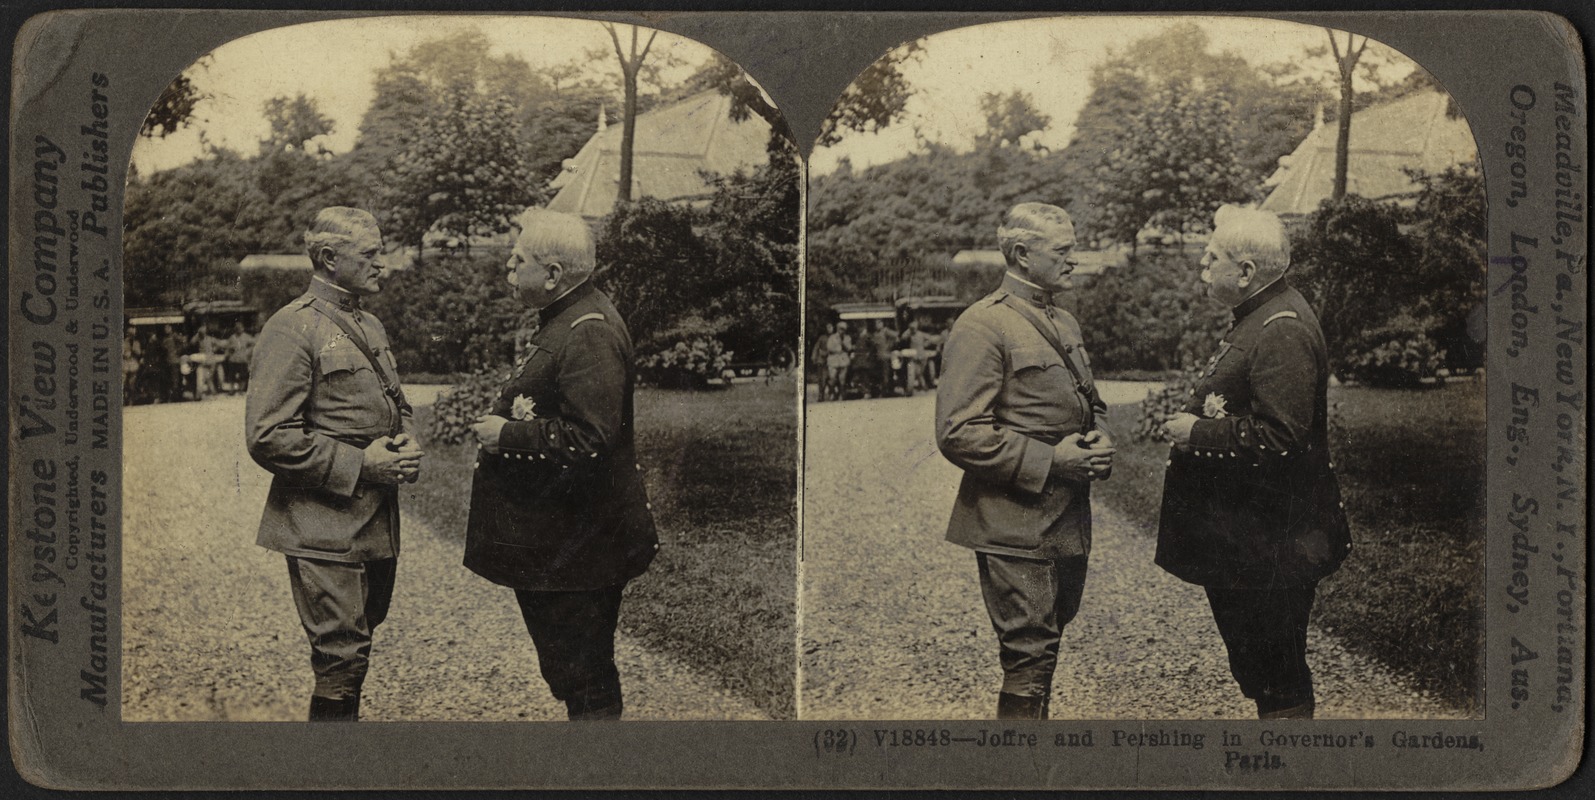 Joffre and Pershing in Governor's Gardens, Paris